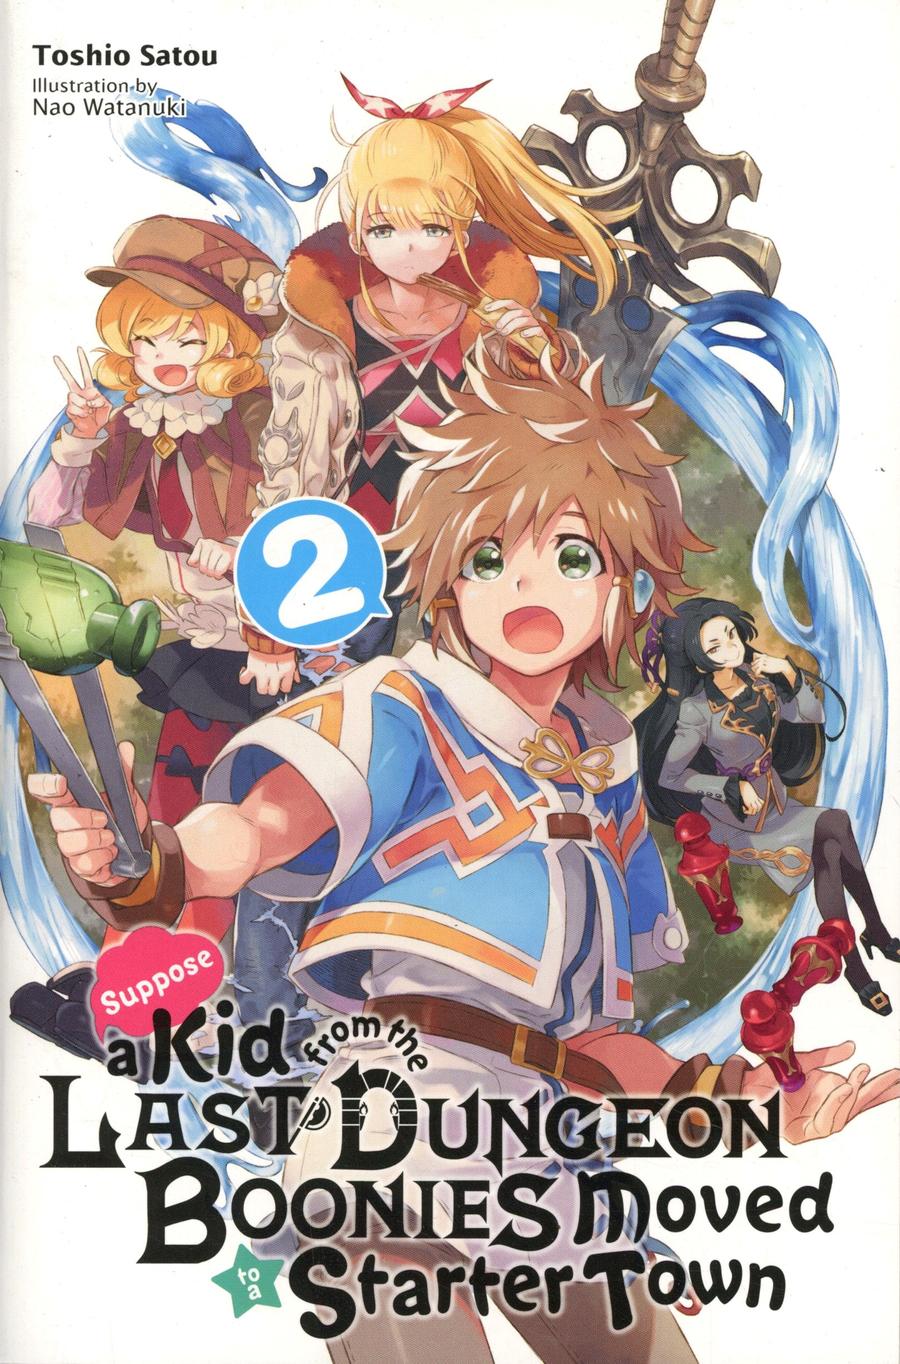 Suppose A Kid From The Last Dungeon Boonies Moved To A Starter Town Light Novel Vol 2